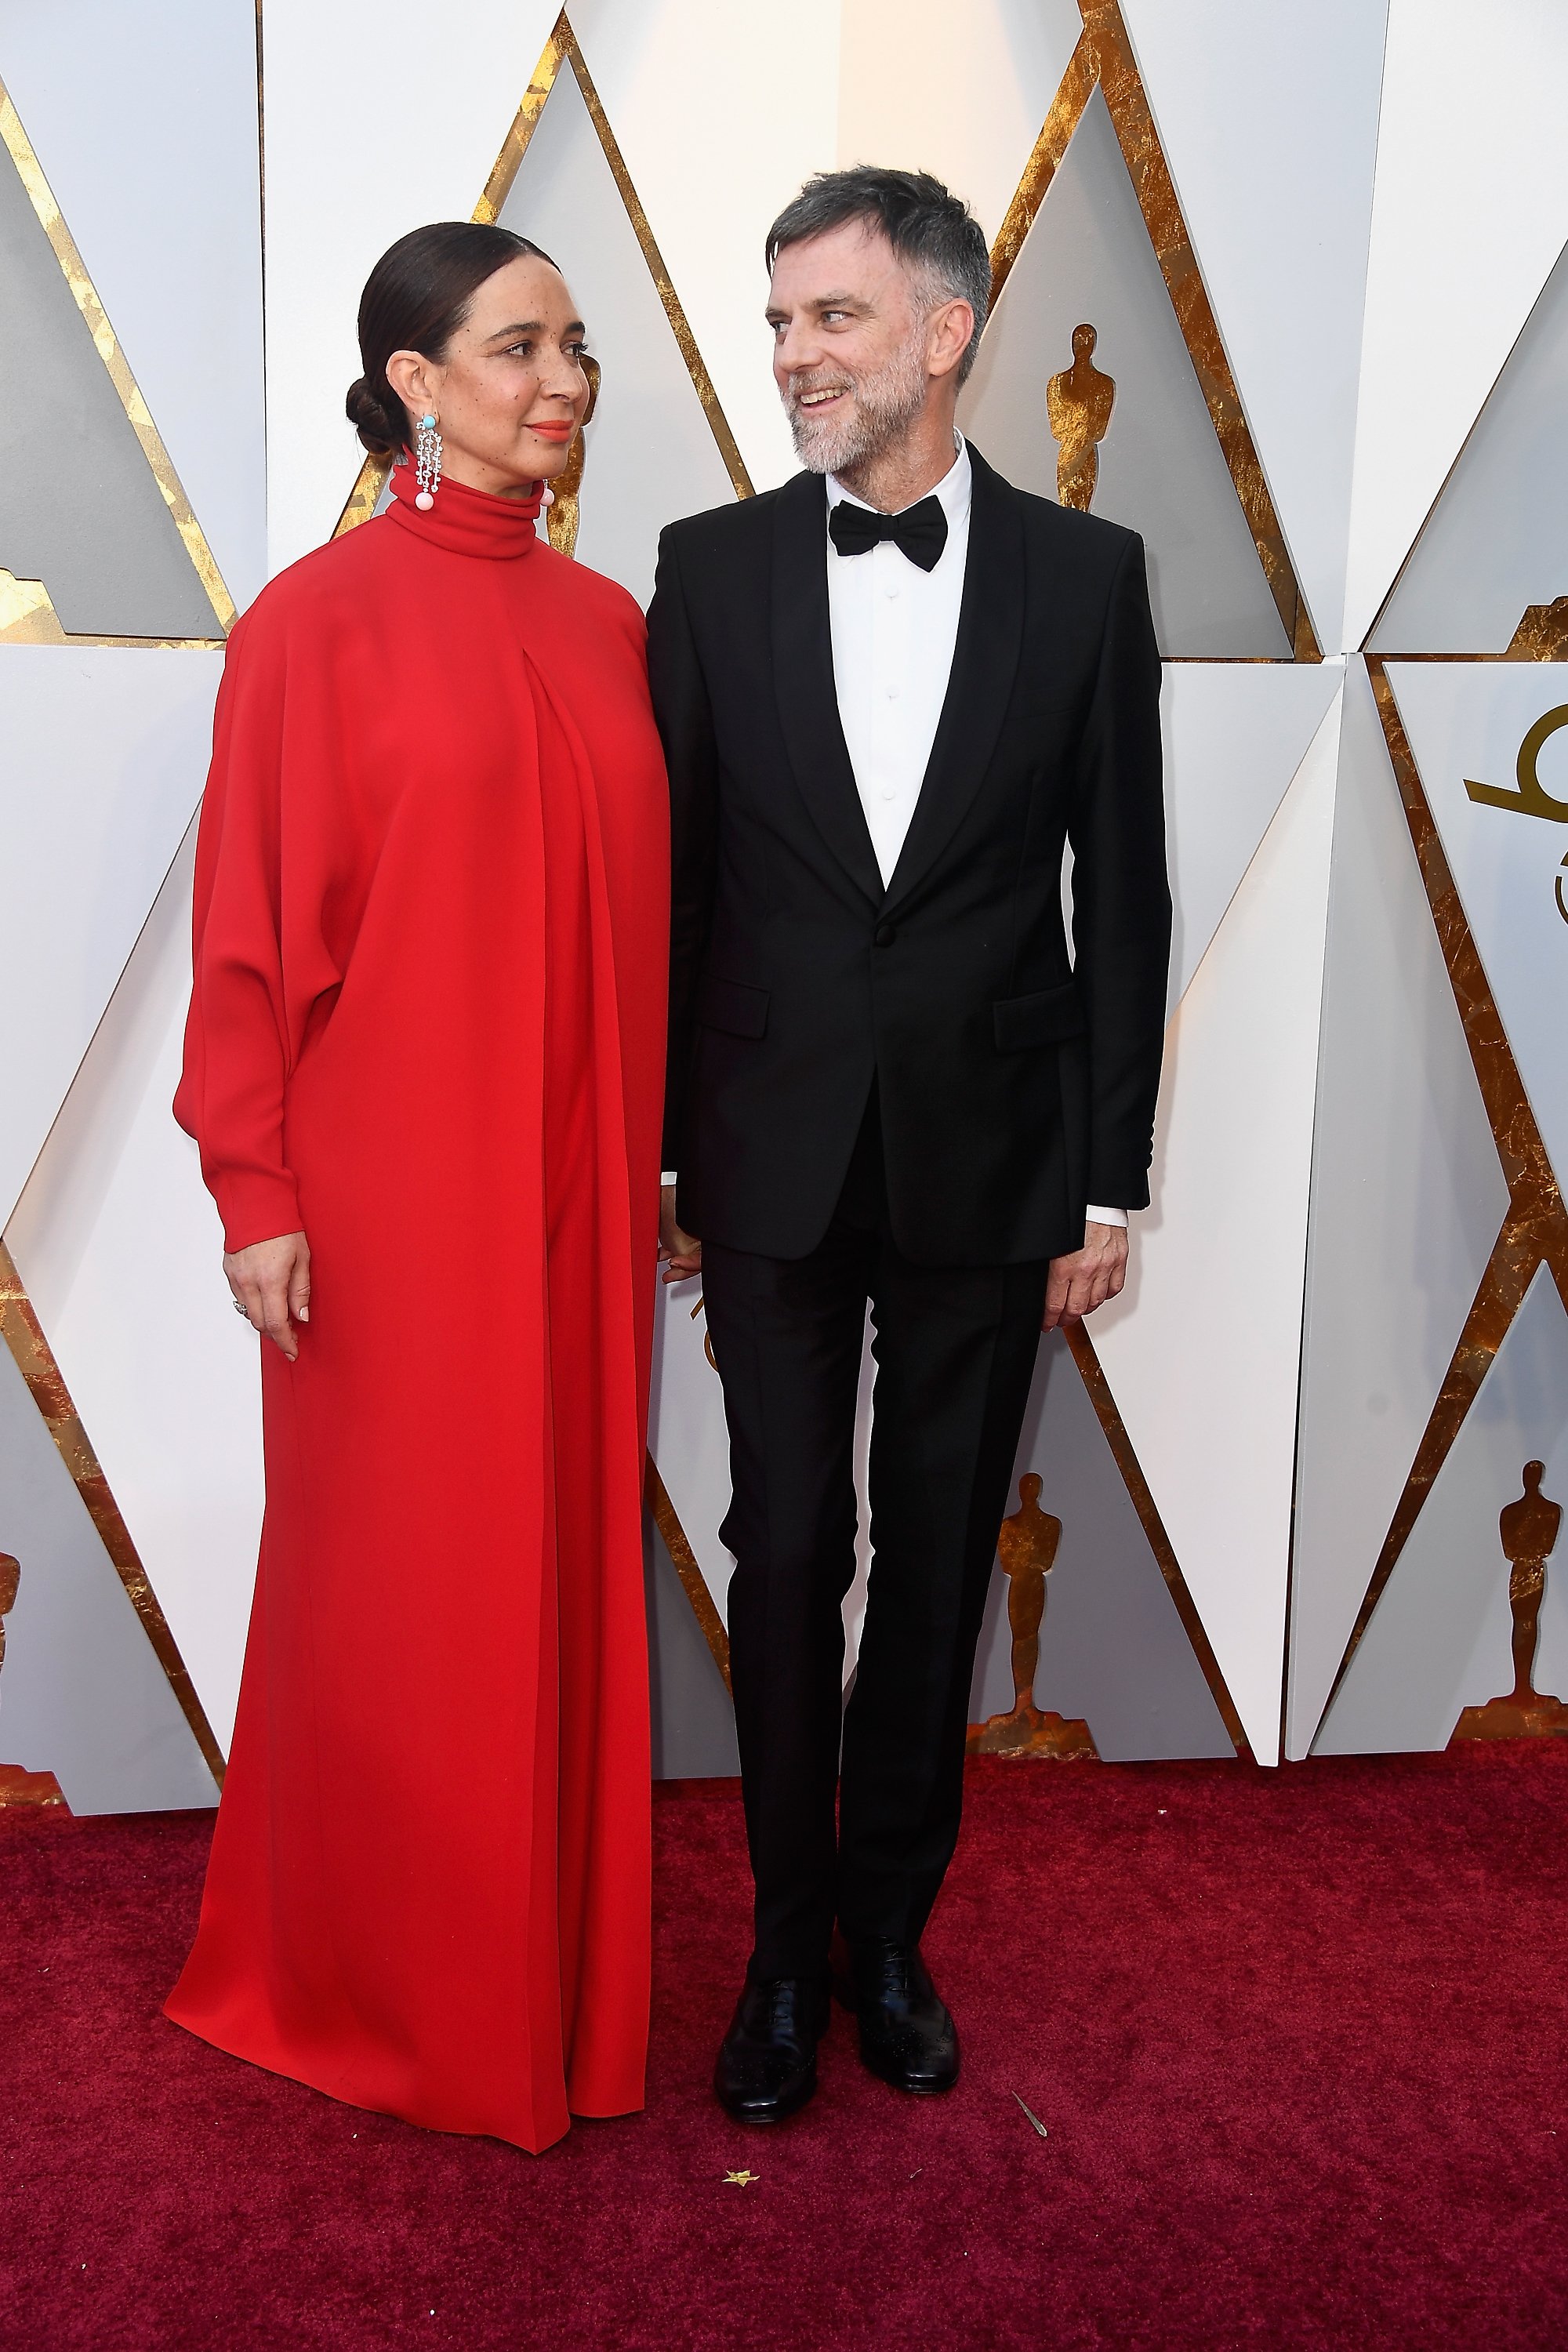  Maya Rudolph and Paul Thomas Anderson at the 90th Annual Academy Awards on March 4, 2018, in California | Source: Getty Images